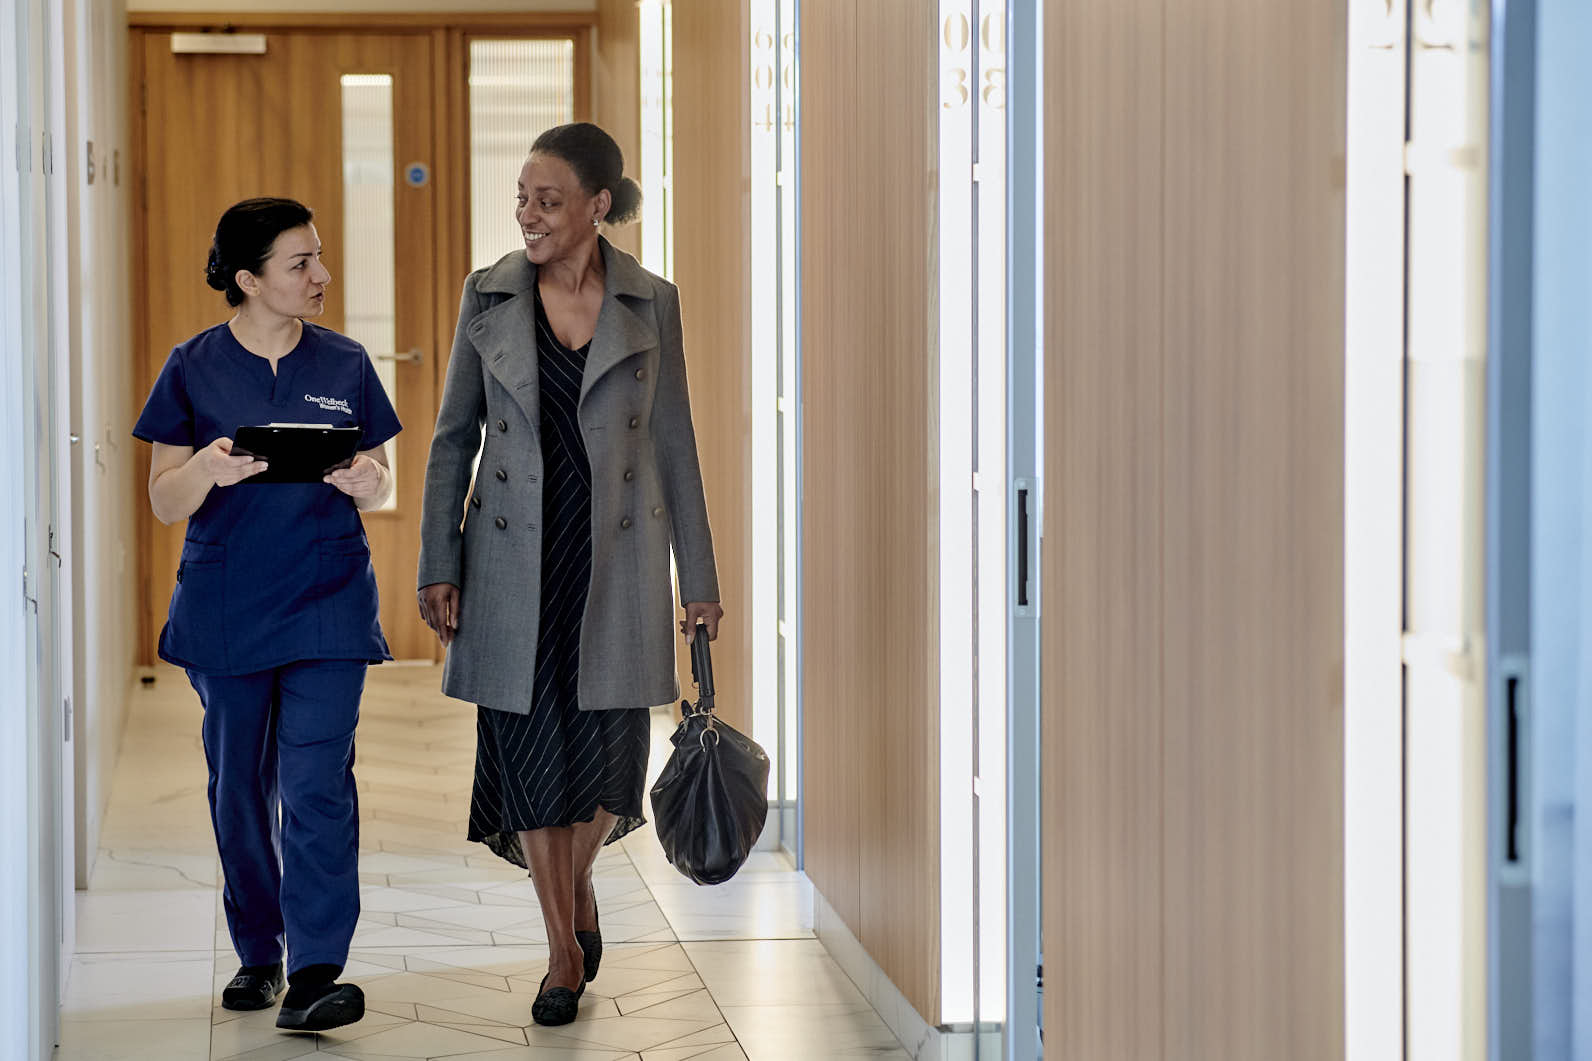 Consultant and patient walking in hallway